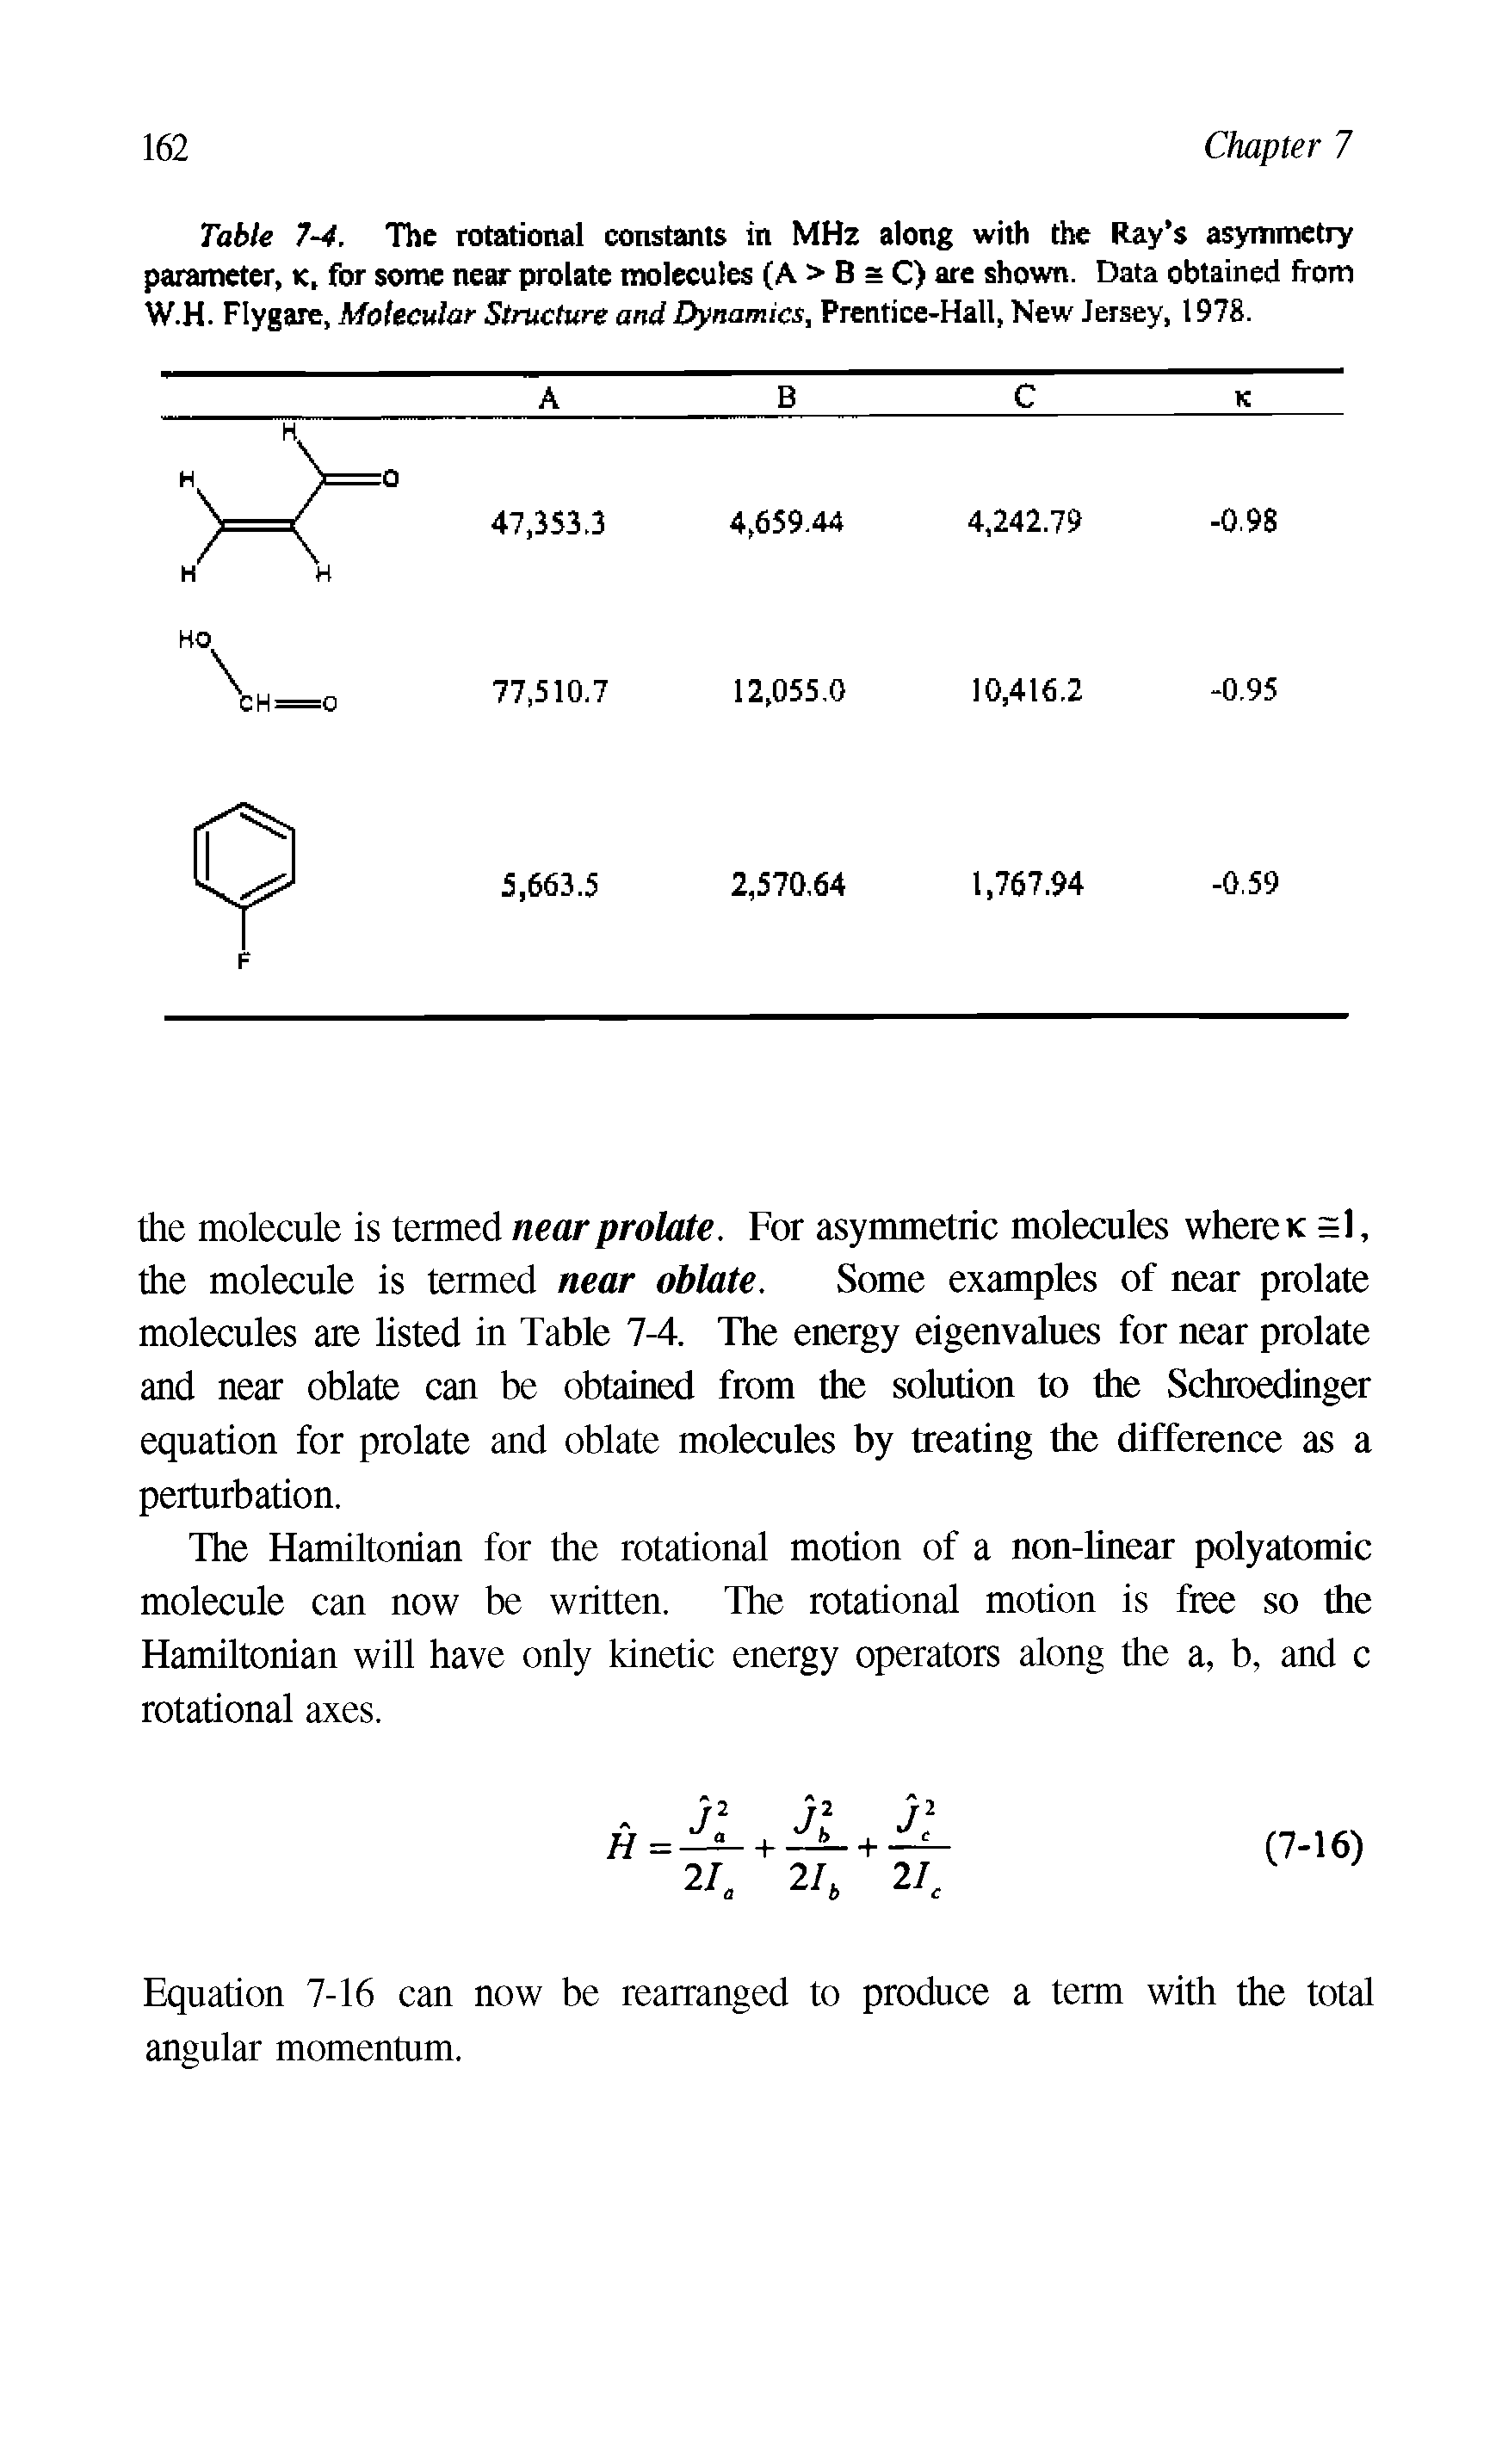 Table 7-4. The rotational constants in MHz along with the Ray s asymmetry parameter, ic, for some near prolate molecules (A > B = C) are shown. Data obtained from W.H. Flygare, Molecidar Structure and Dynamics, Prentice-Hall, New Jersey, 1978.